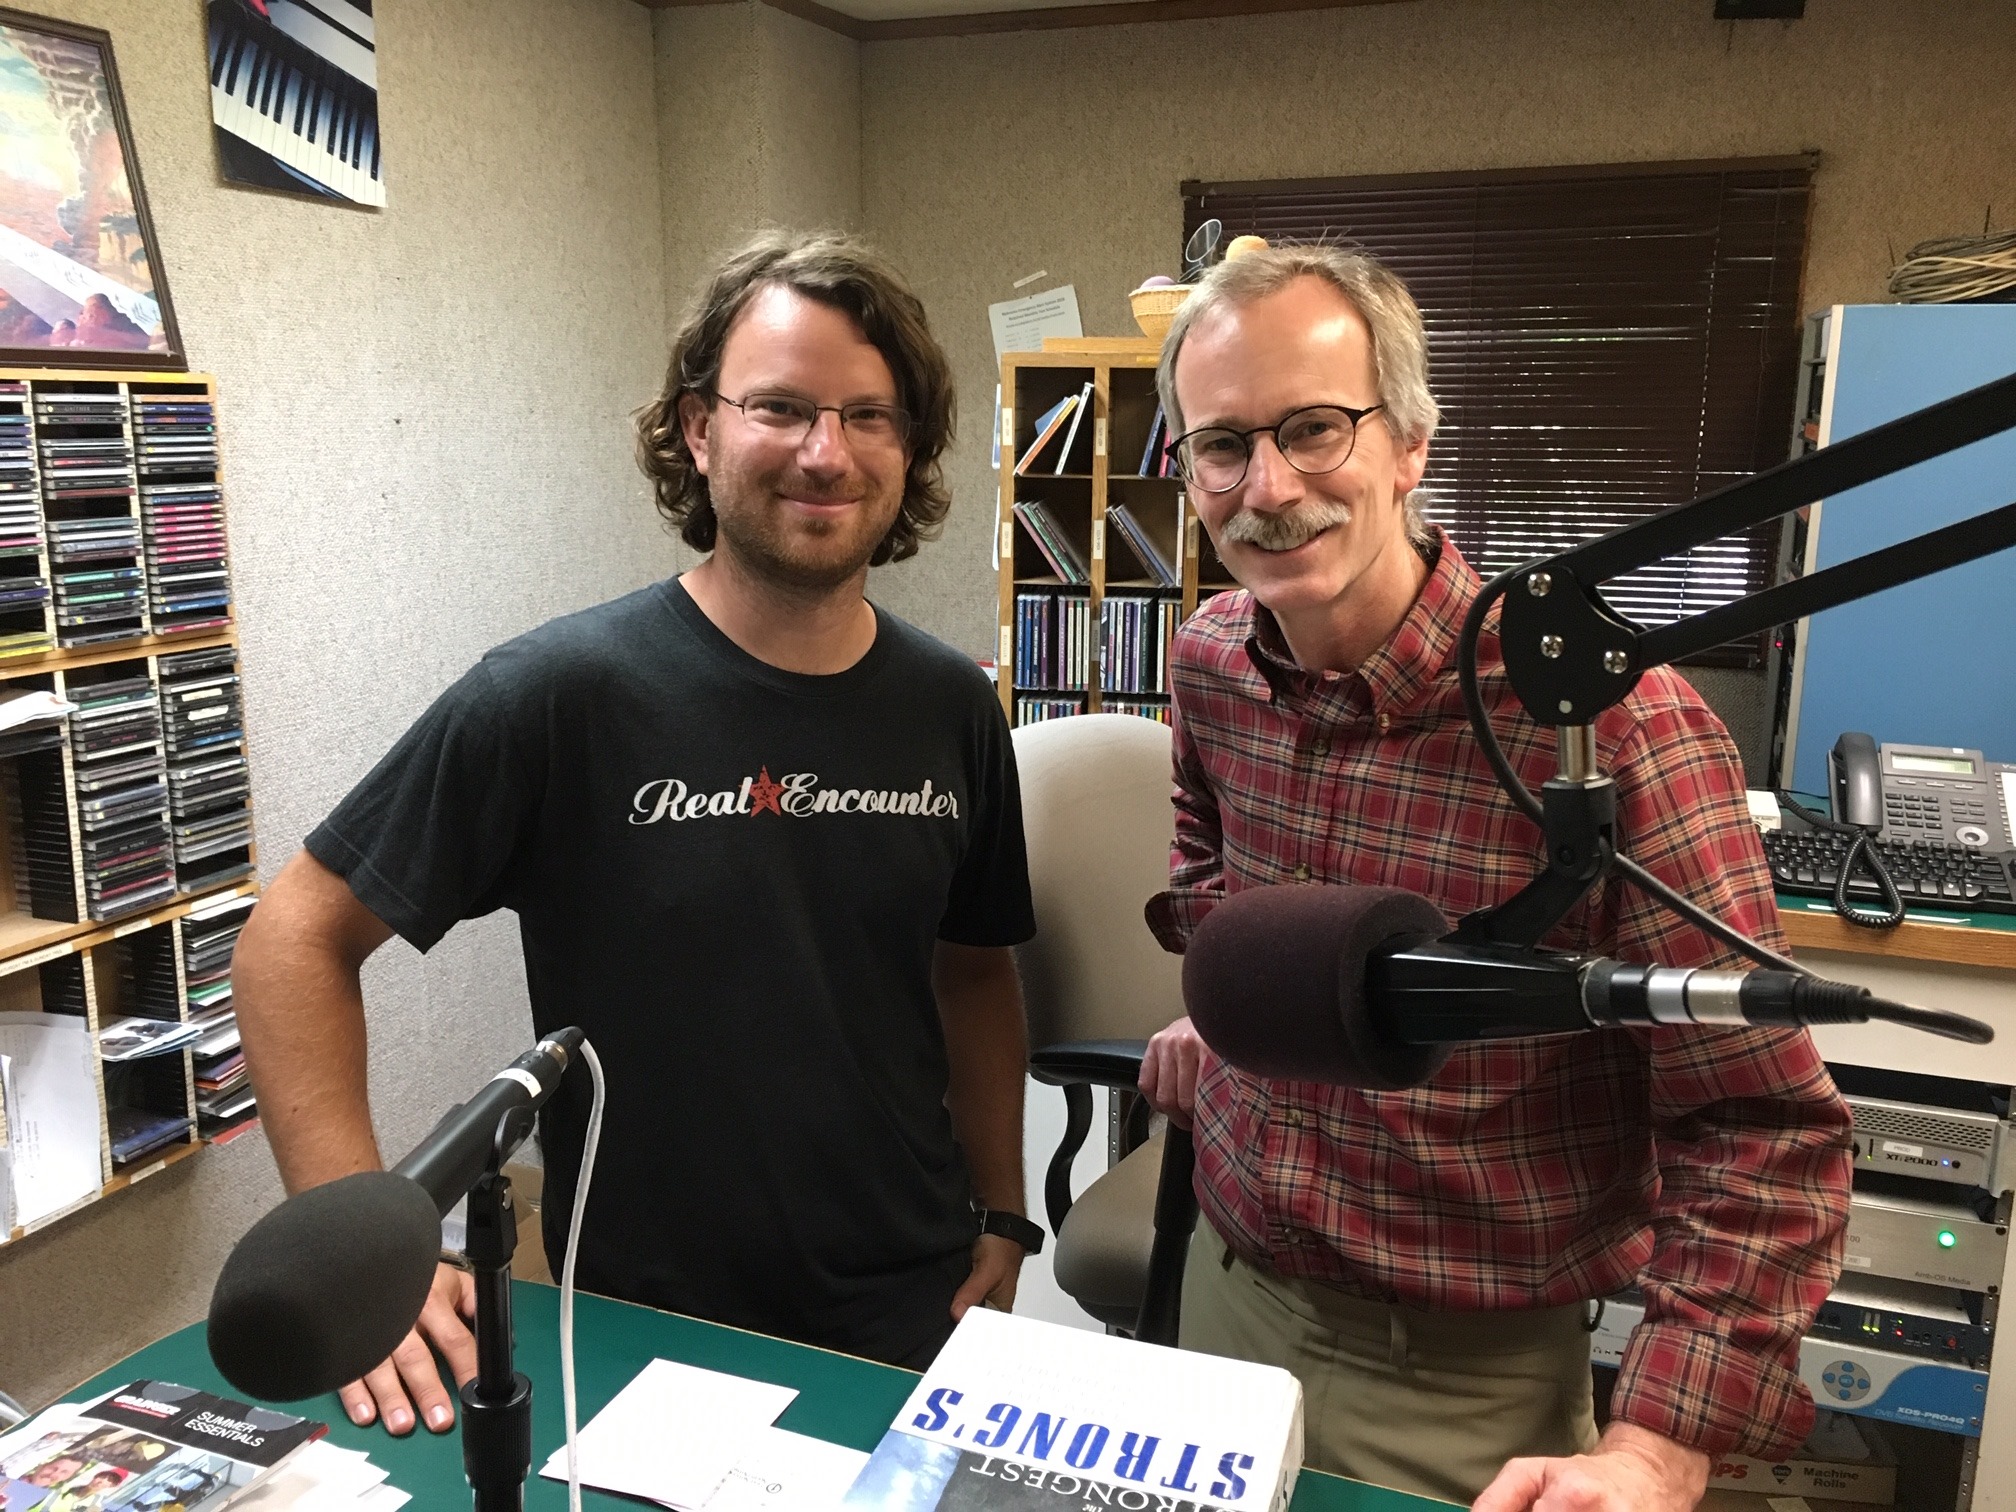  Guest Kyle Nosal, originally from Missouri, tells Russ Garrett what life is like when you decide to sell everything and travel America with your family and a 5th wheel camper. (July 1) 